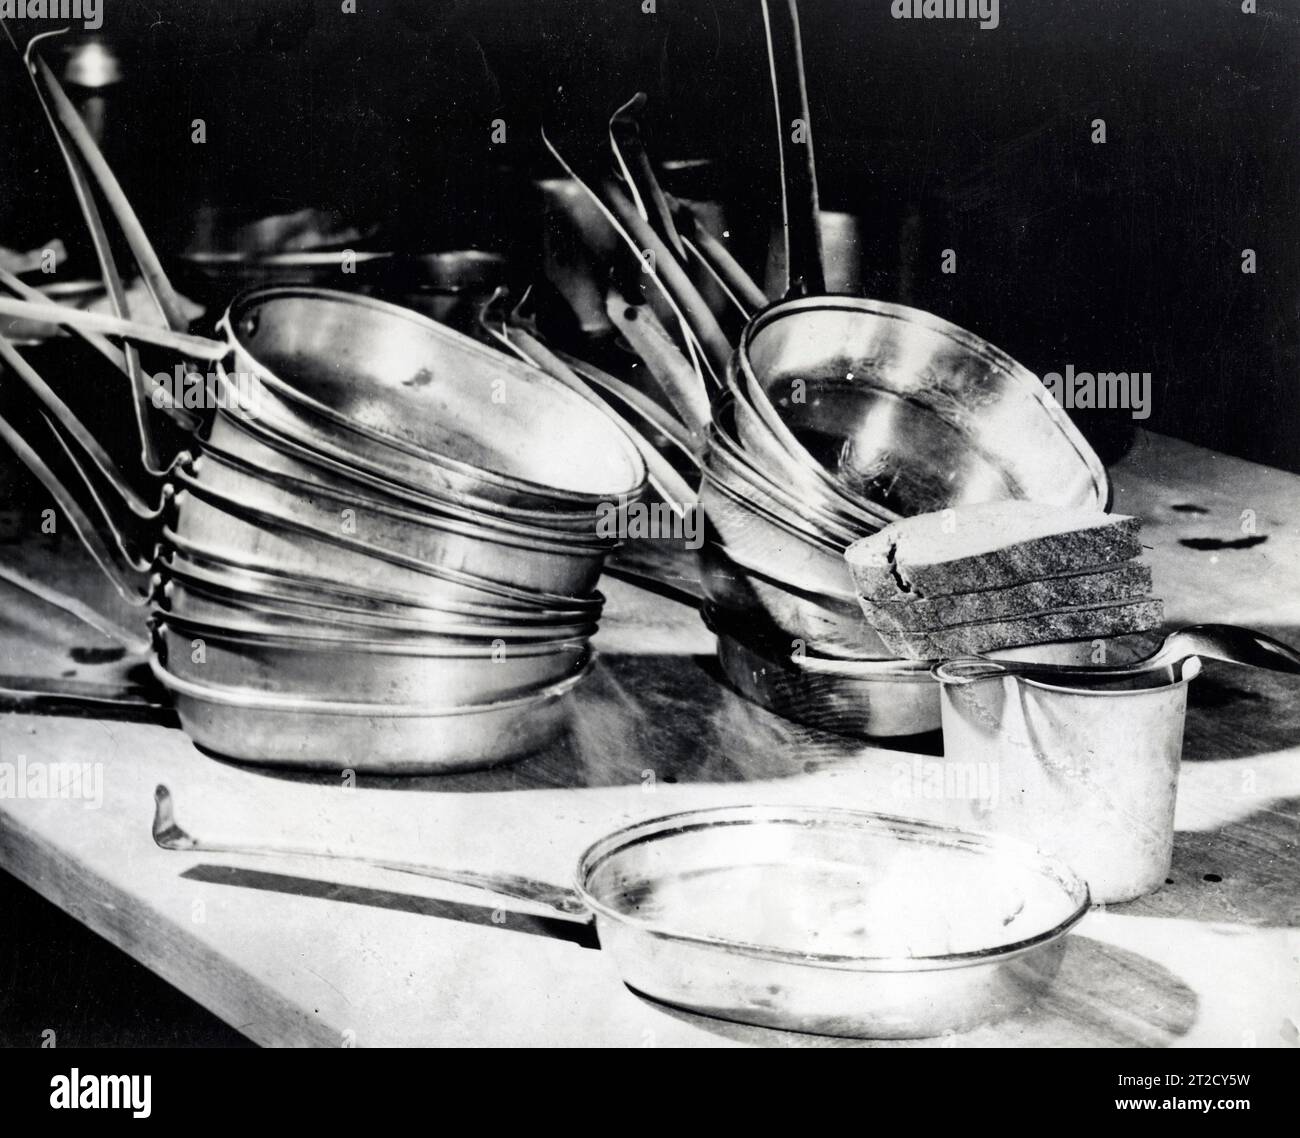 Lunch for Goering; in foreground is noon meal ready to be taken to the former chief of the Luftwaffe. It consists of three pieces of brown bread (about 150 grams), one cup (and only one) of coffee, about 200 grams of dehydrated eggs, and a goulash (stew) of about 200 grams. Dining equipment consists of a spoon, canteen cup without handle, and a GI meat can. In the background are the mess kits for other prisoners standing trial before the International Military Tribunal at Nuremberg Stock Photo